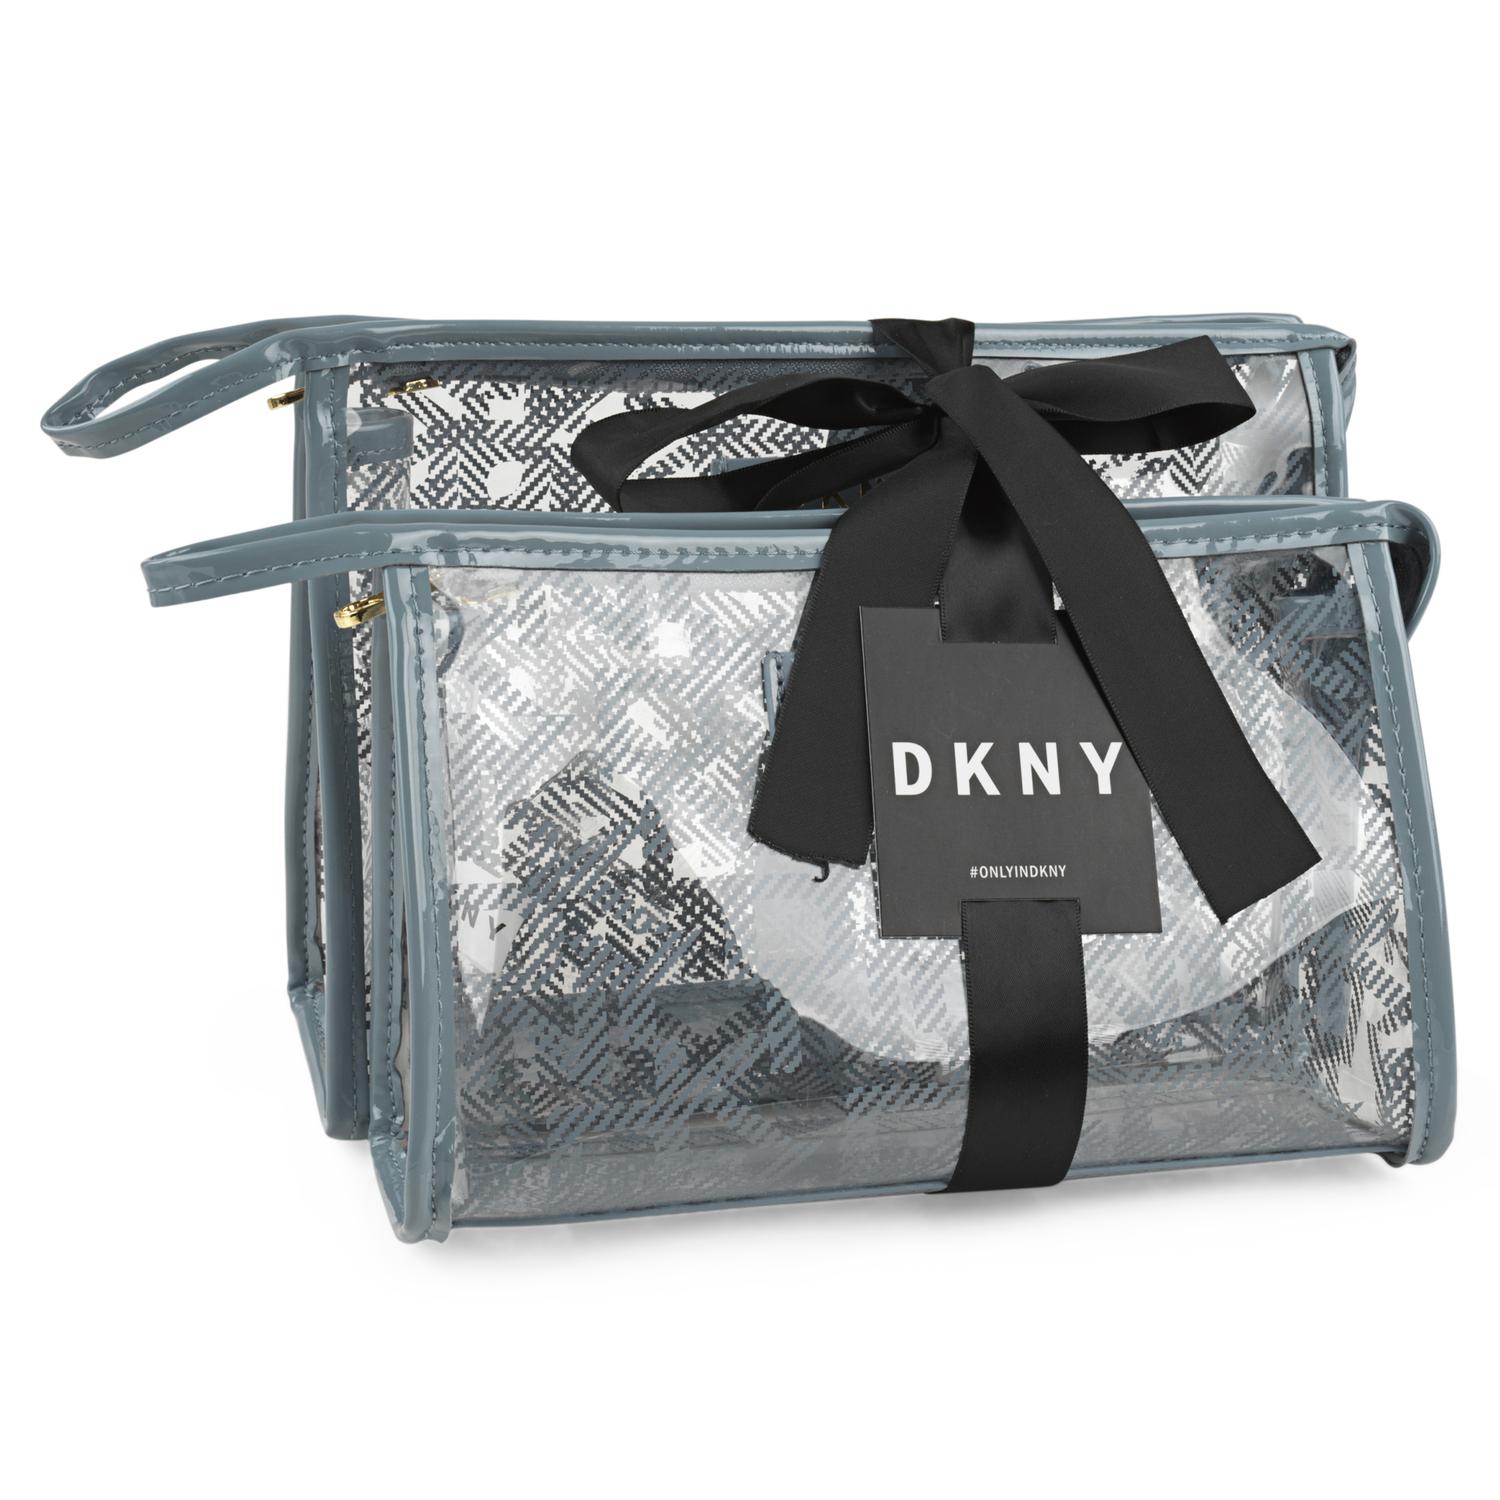 DKNY-637 NECESER PACK 2 UNIDADES LD